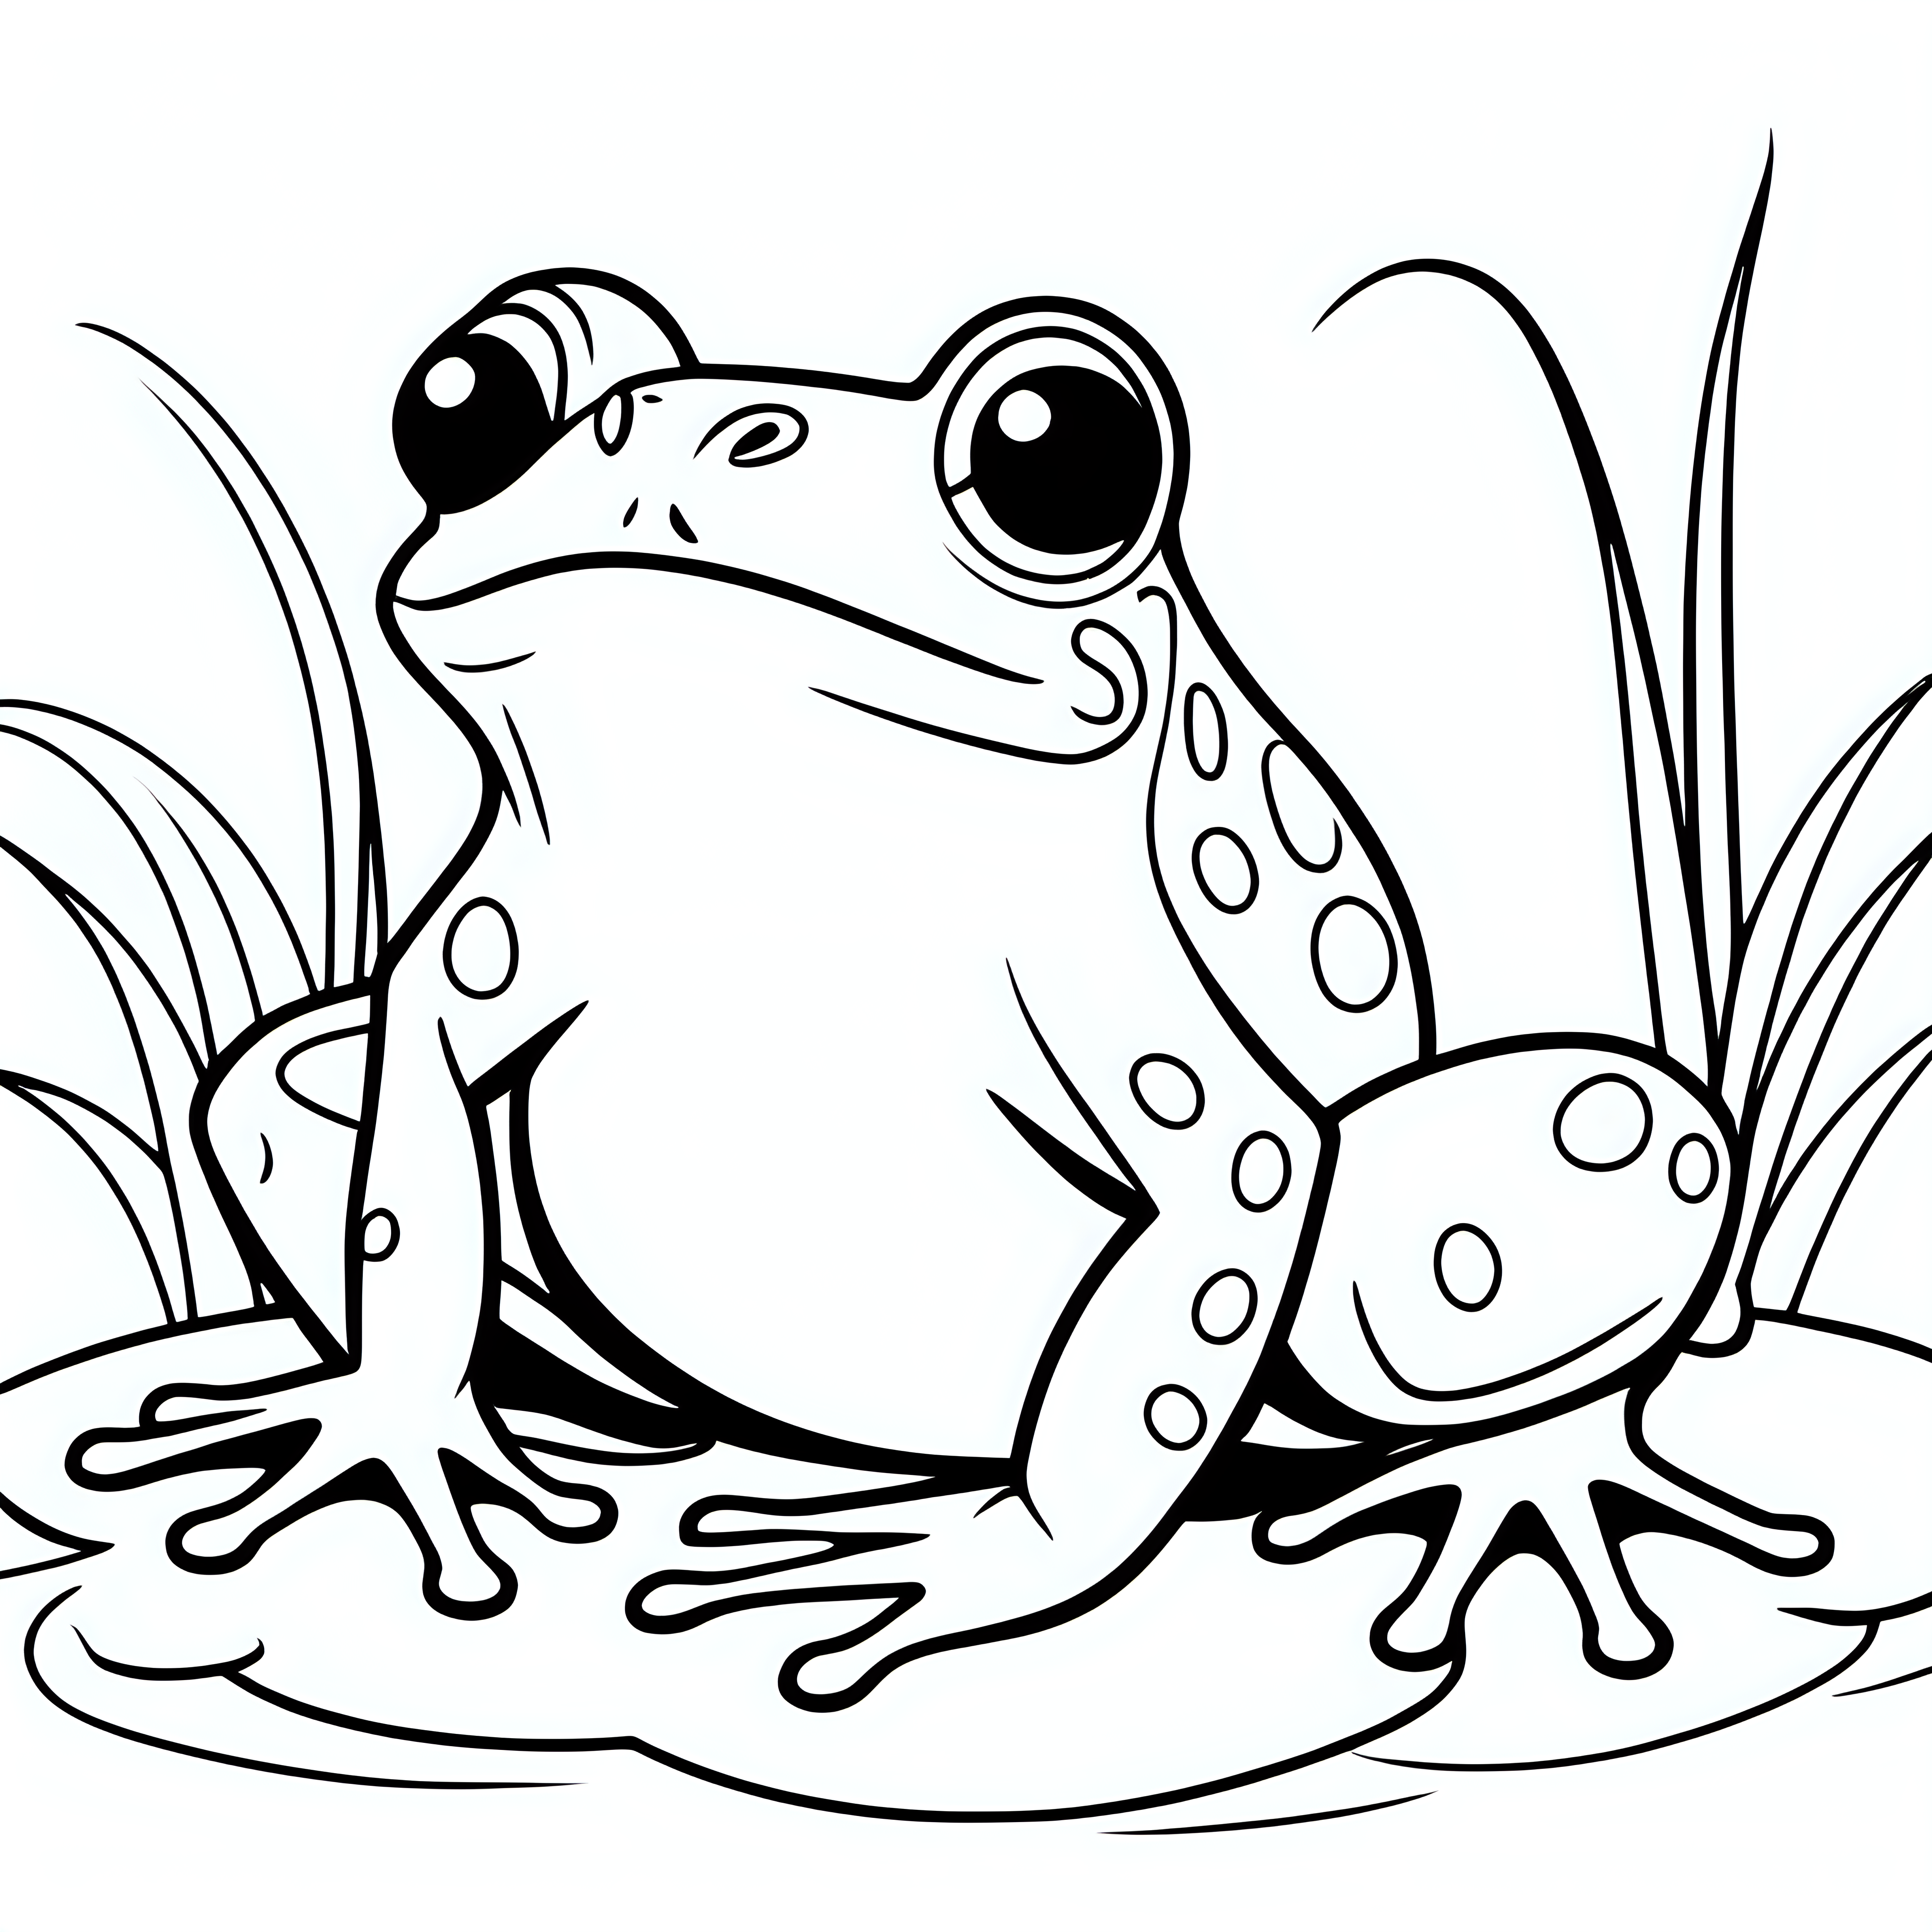 draw a cute frog animal with only the outline in black for a coloring book for kids